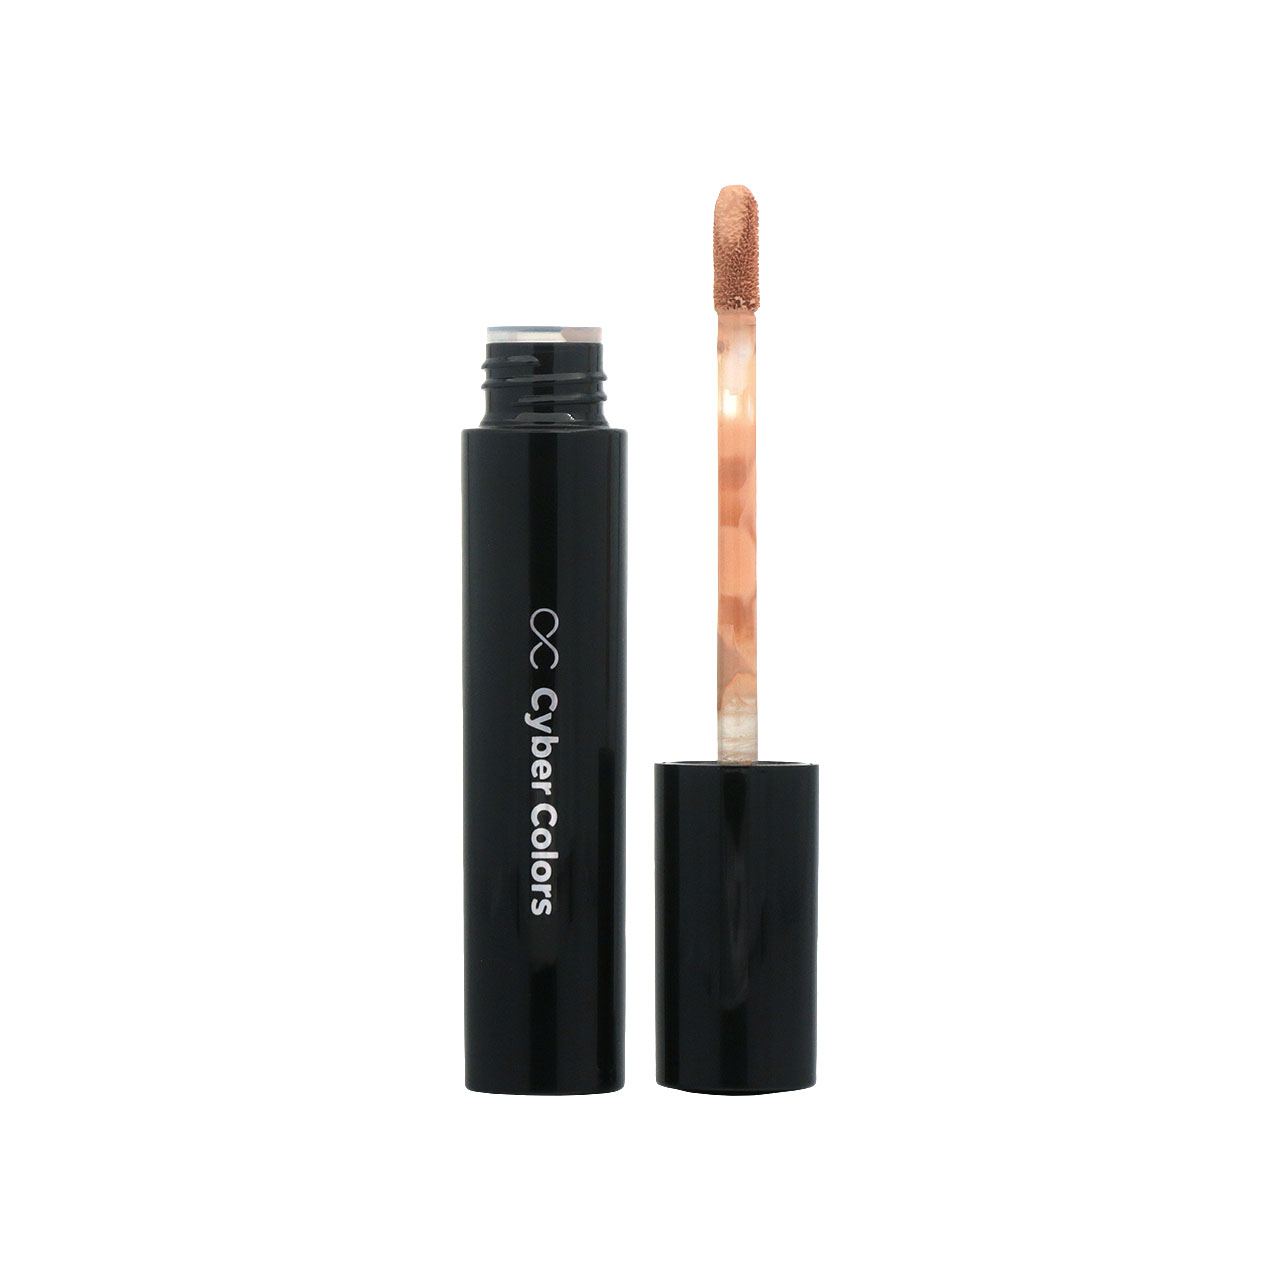 Cyber Colors High Coverage Treatment Concealer #02 Beige 4.4ml